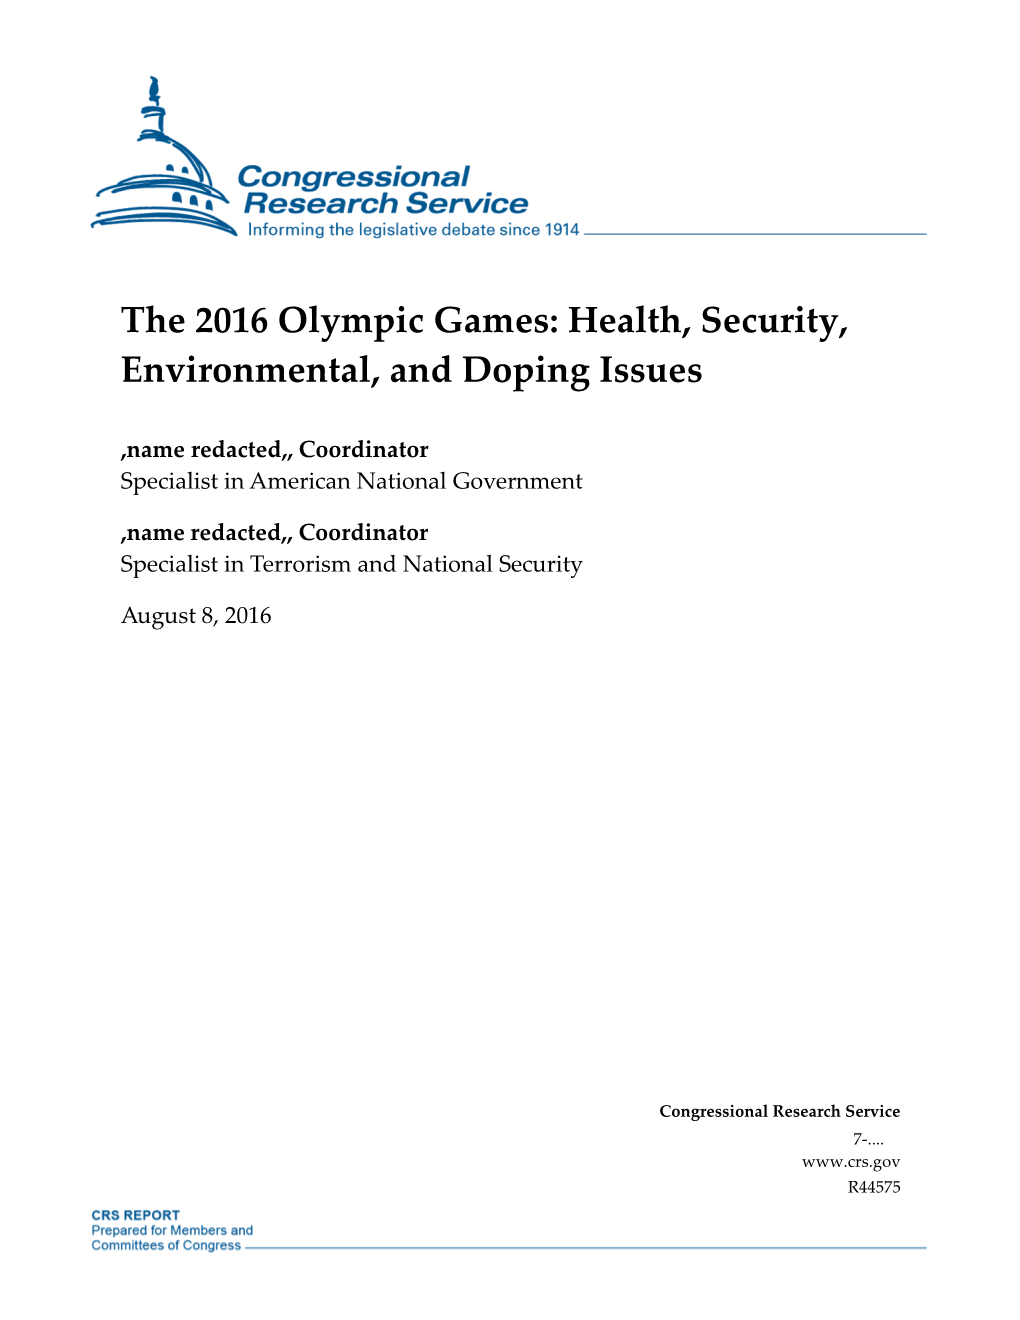 The 2016 Olympic Games: Health, Security, Environmental, and Doping Issues